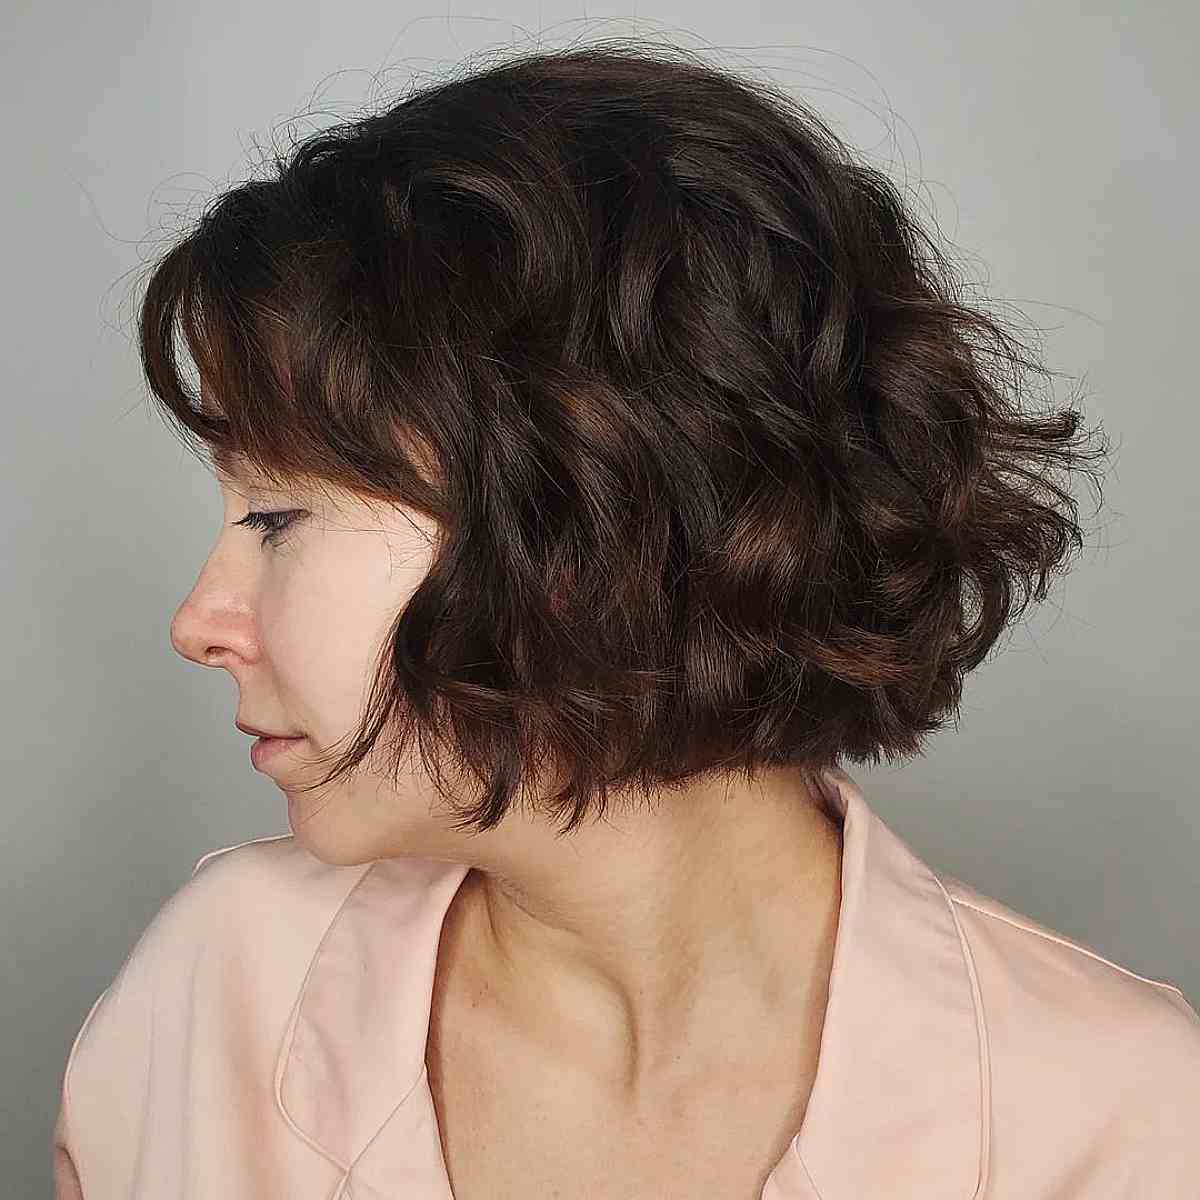 Chin-Length Textured Short Bob with Waves and Fringe